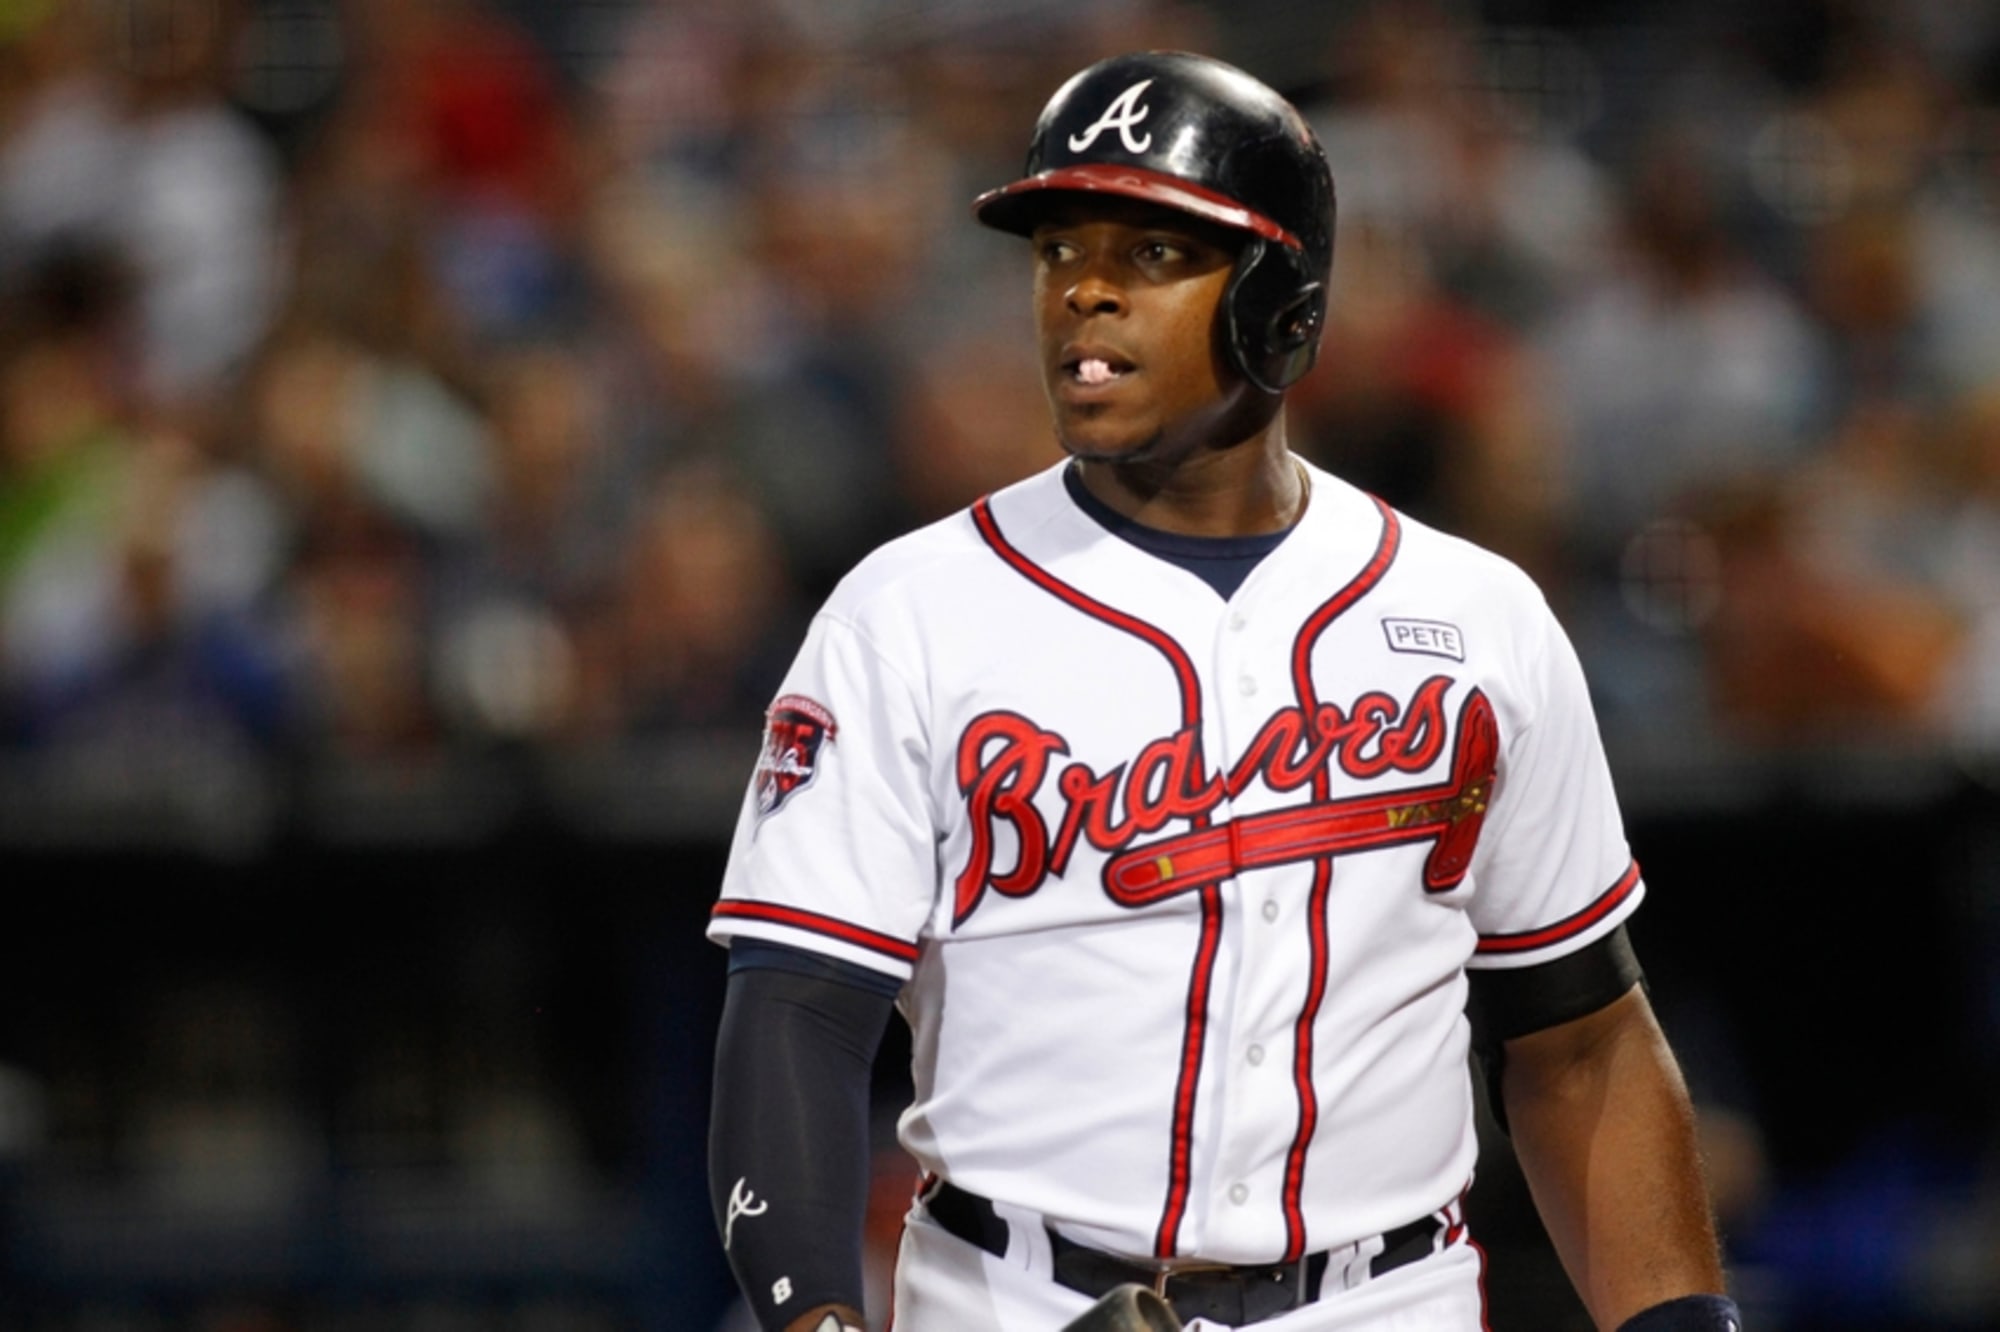 Braves Authentics: Justin Upton Game Used Jersey - 2013 NLDS